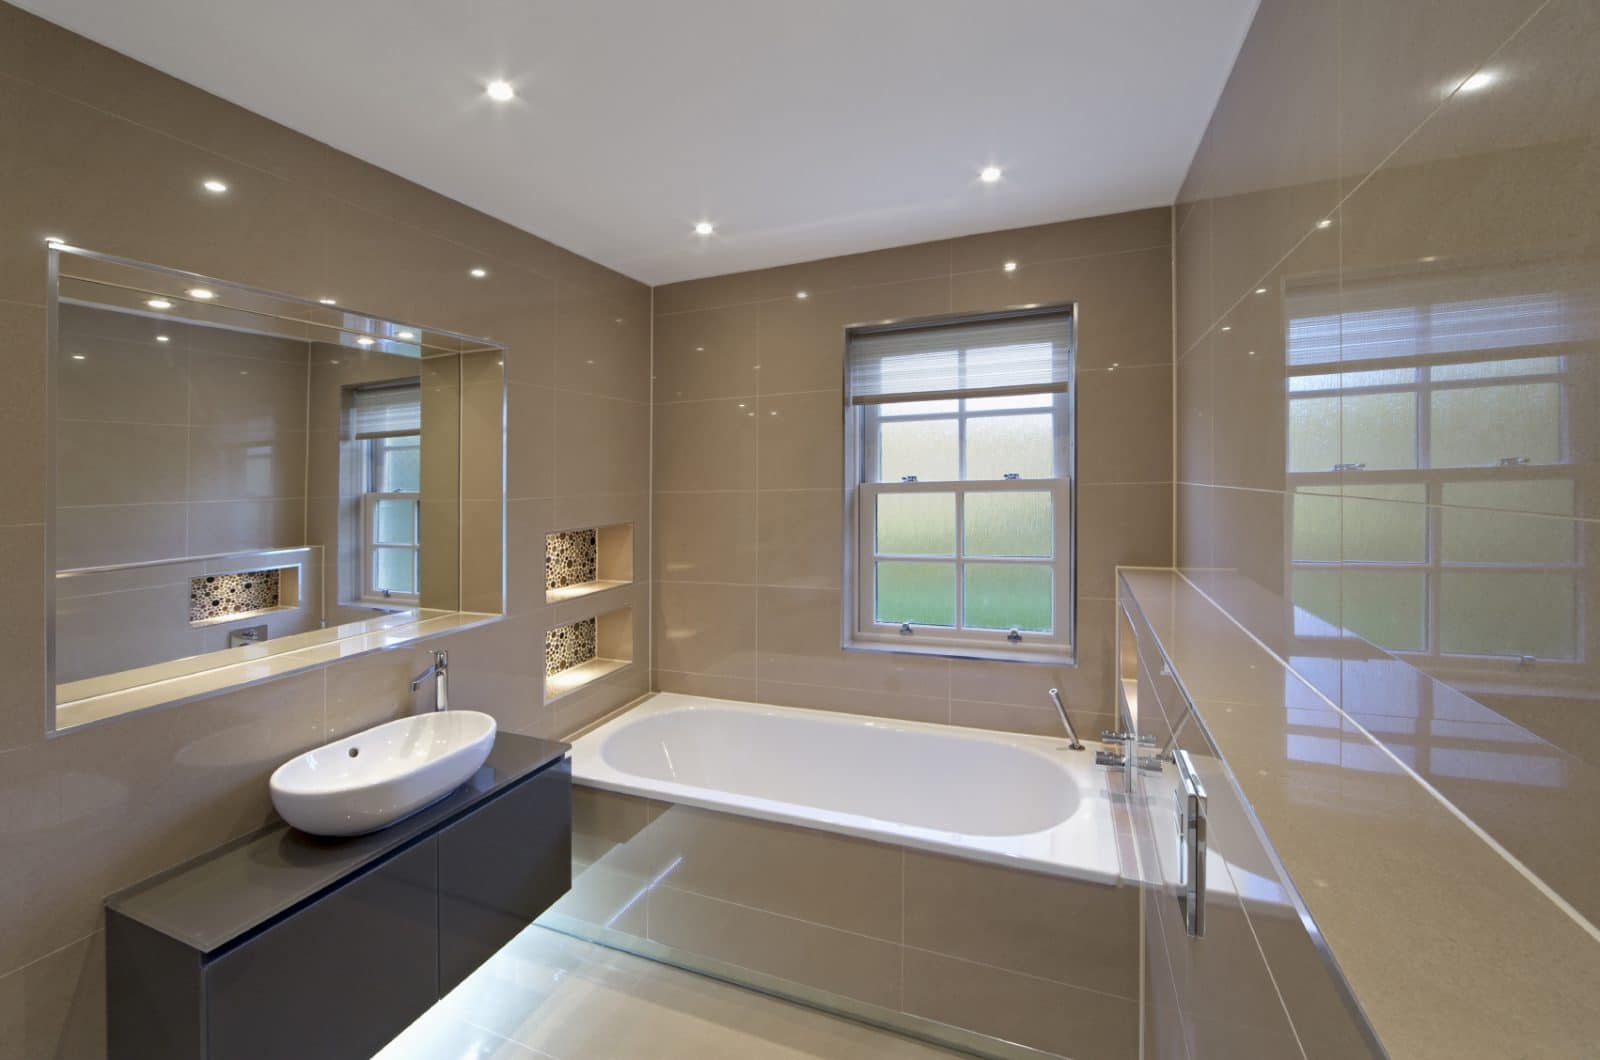 Bathroom Fitting Costs Homeforce, How Much Does It Cost To Replace A Small Bathroom Uk